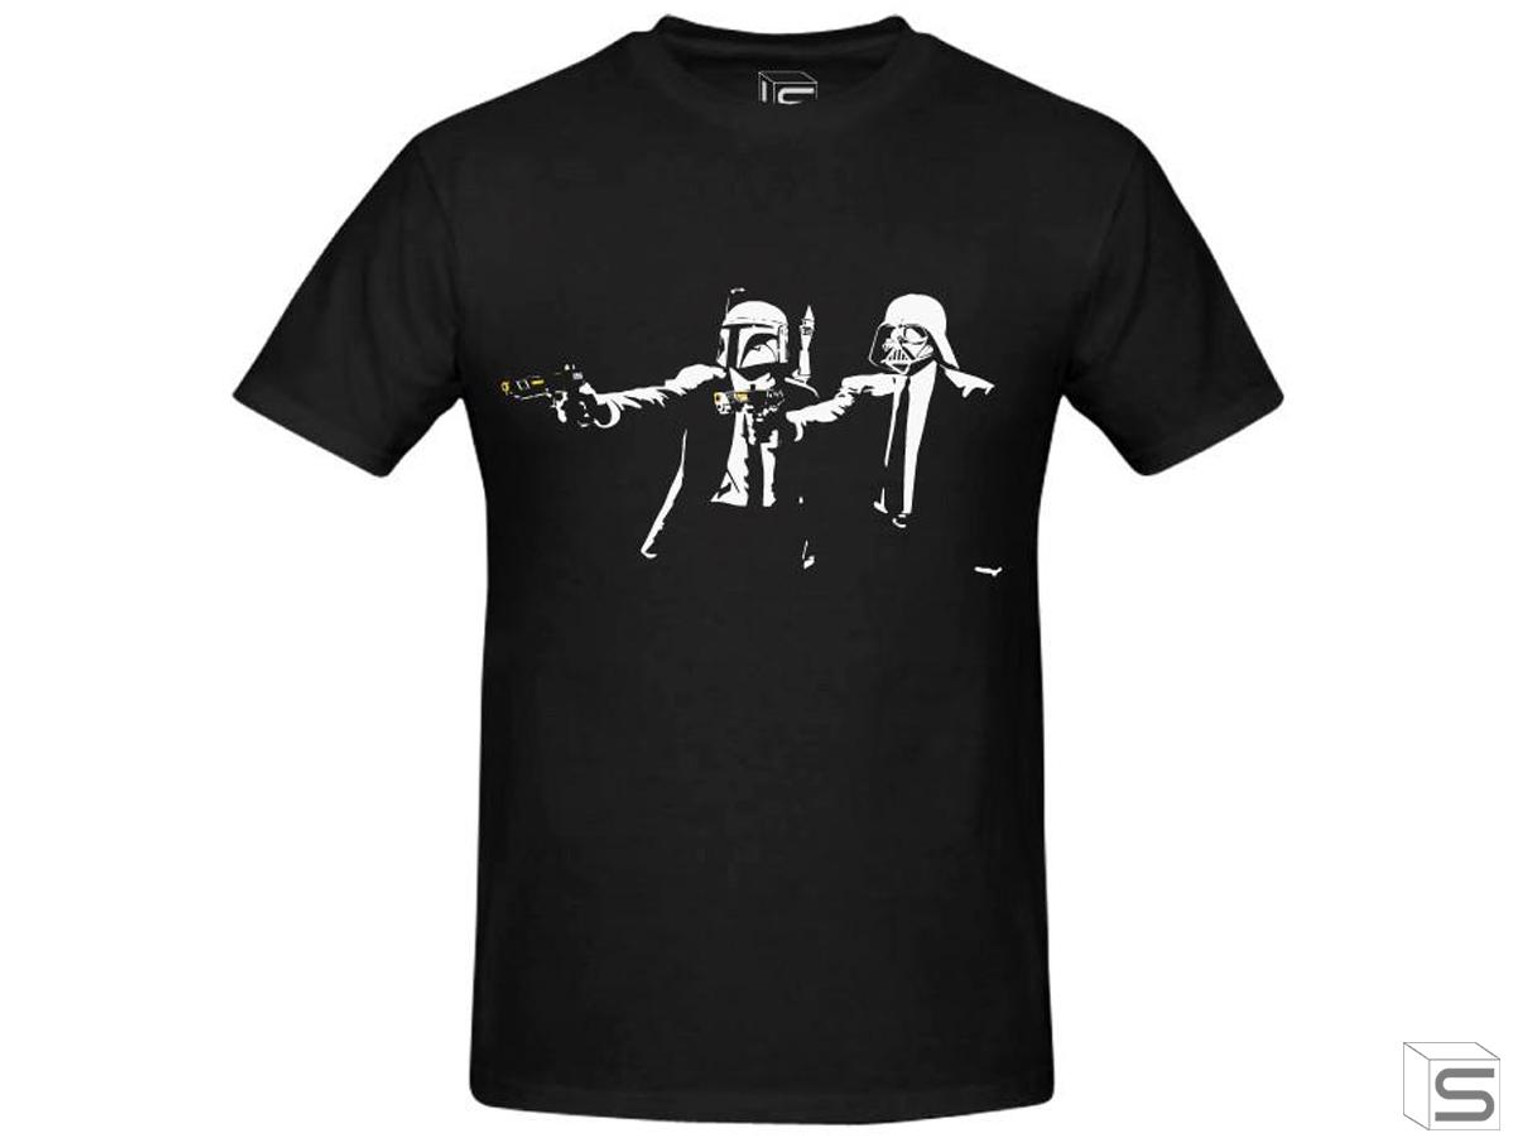 Salient Arms "Pulp Fiction" Screen Printed Cotton Womens T-Shirt